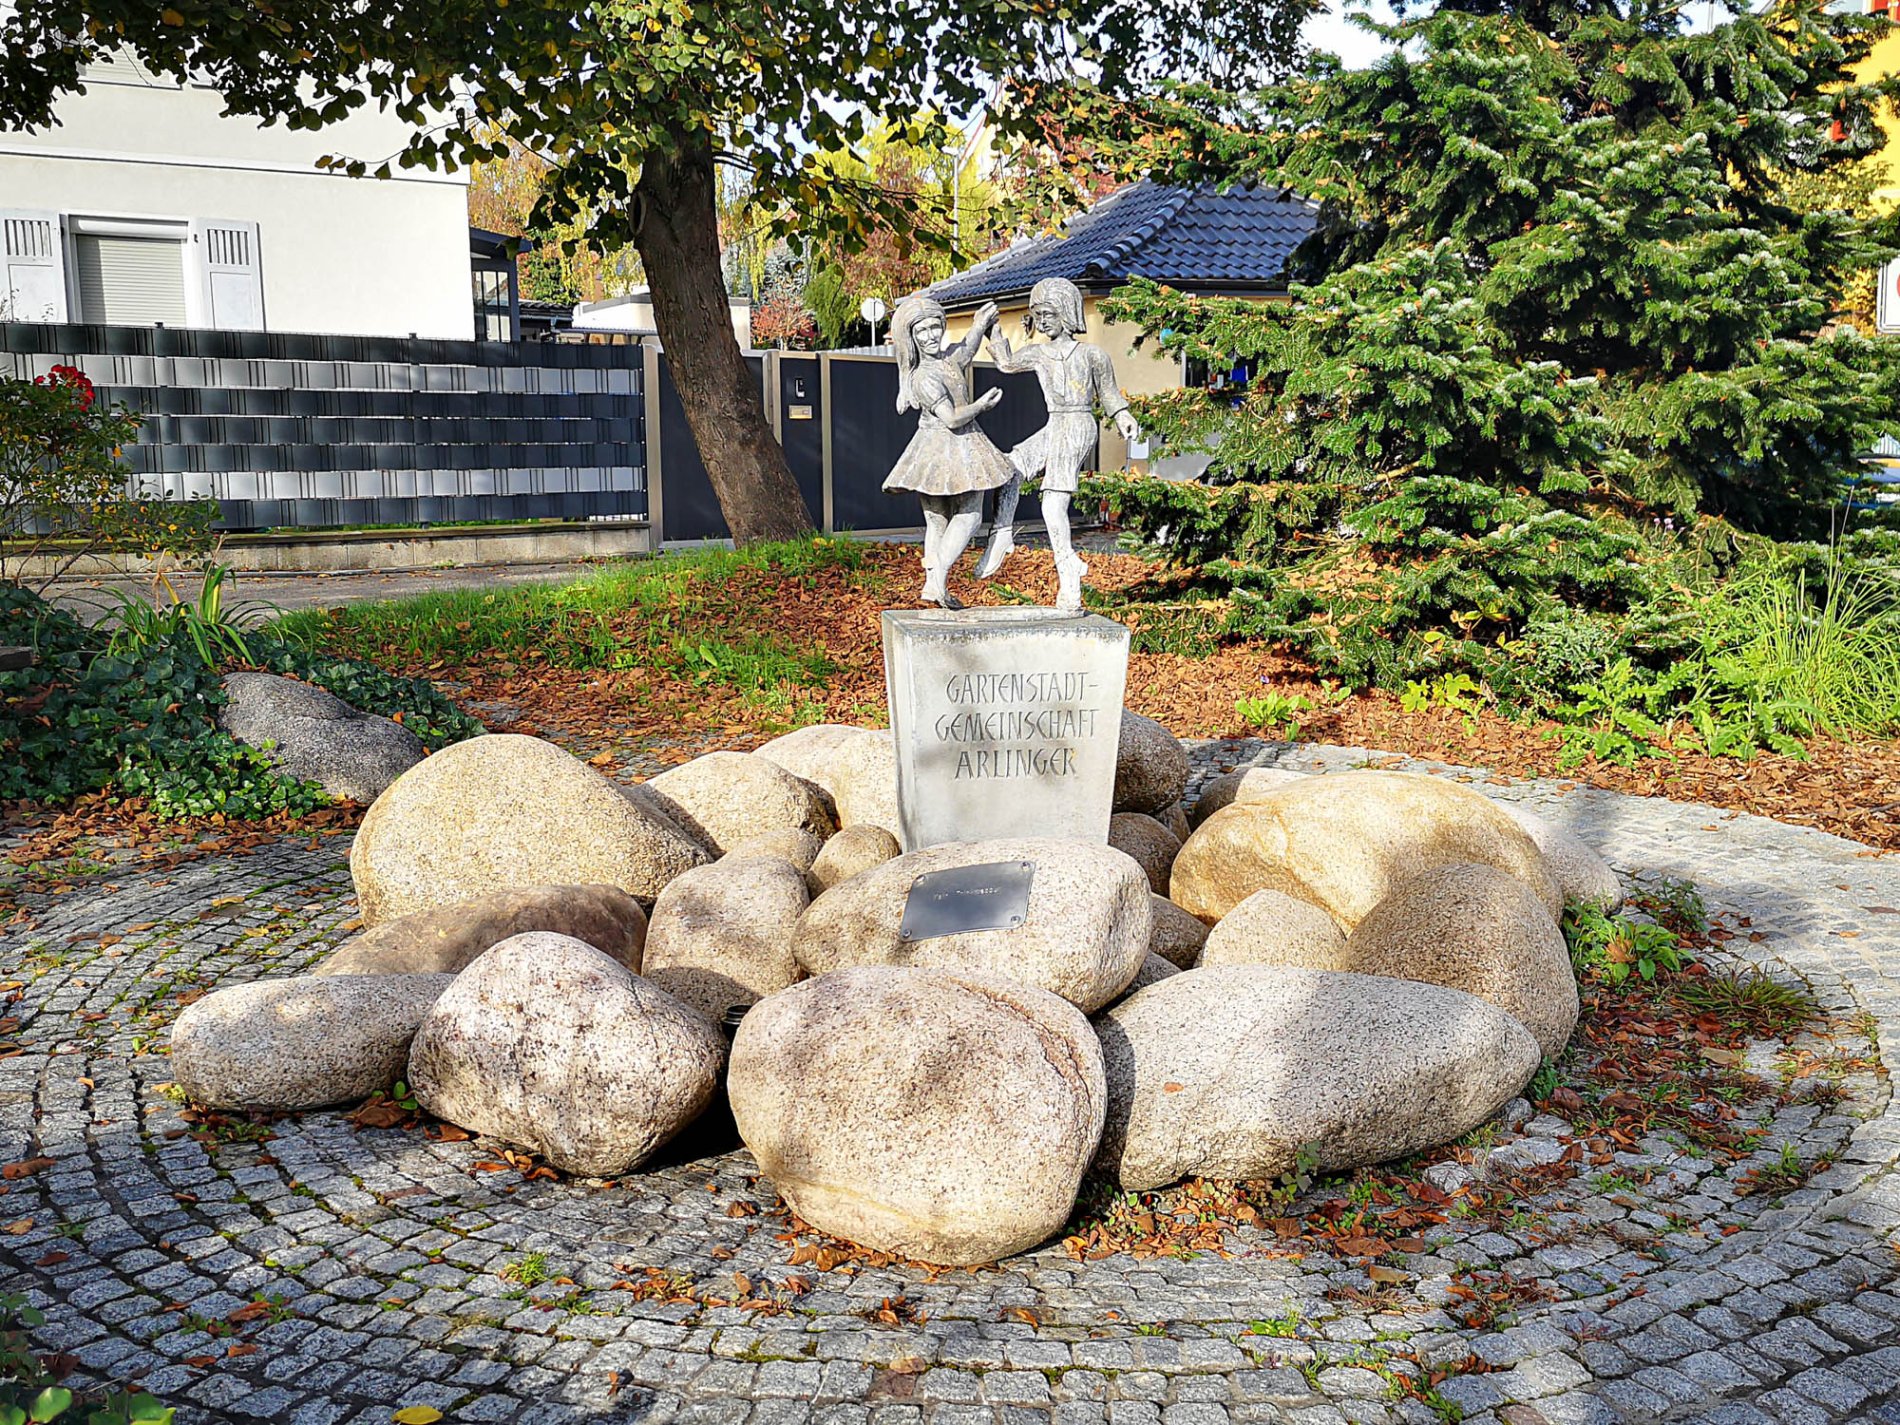 The fountain in the Arlingen district